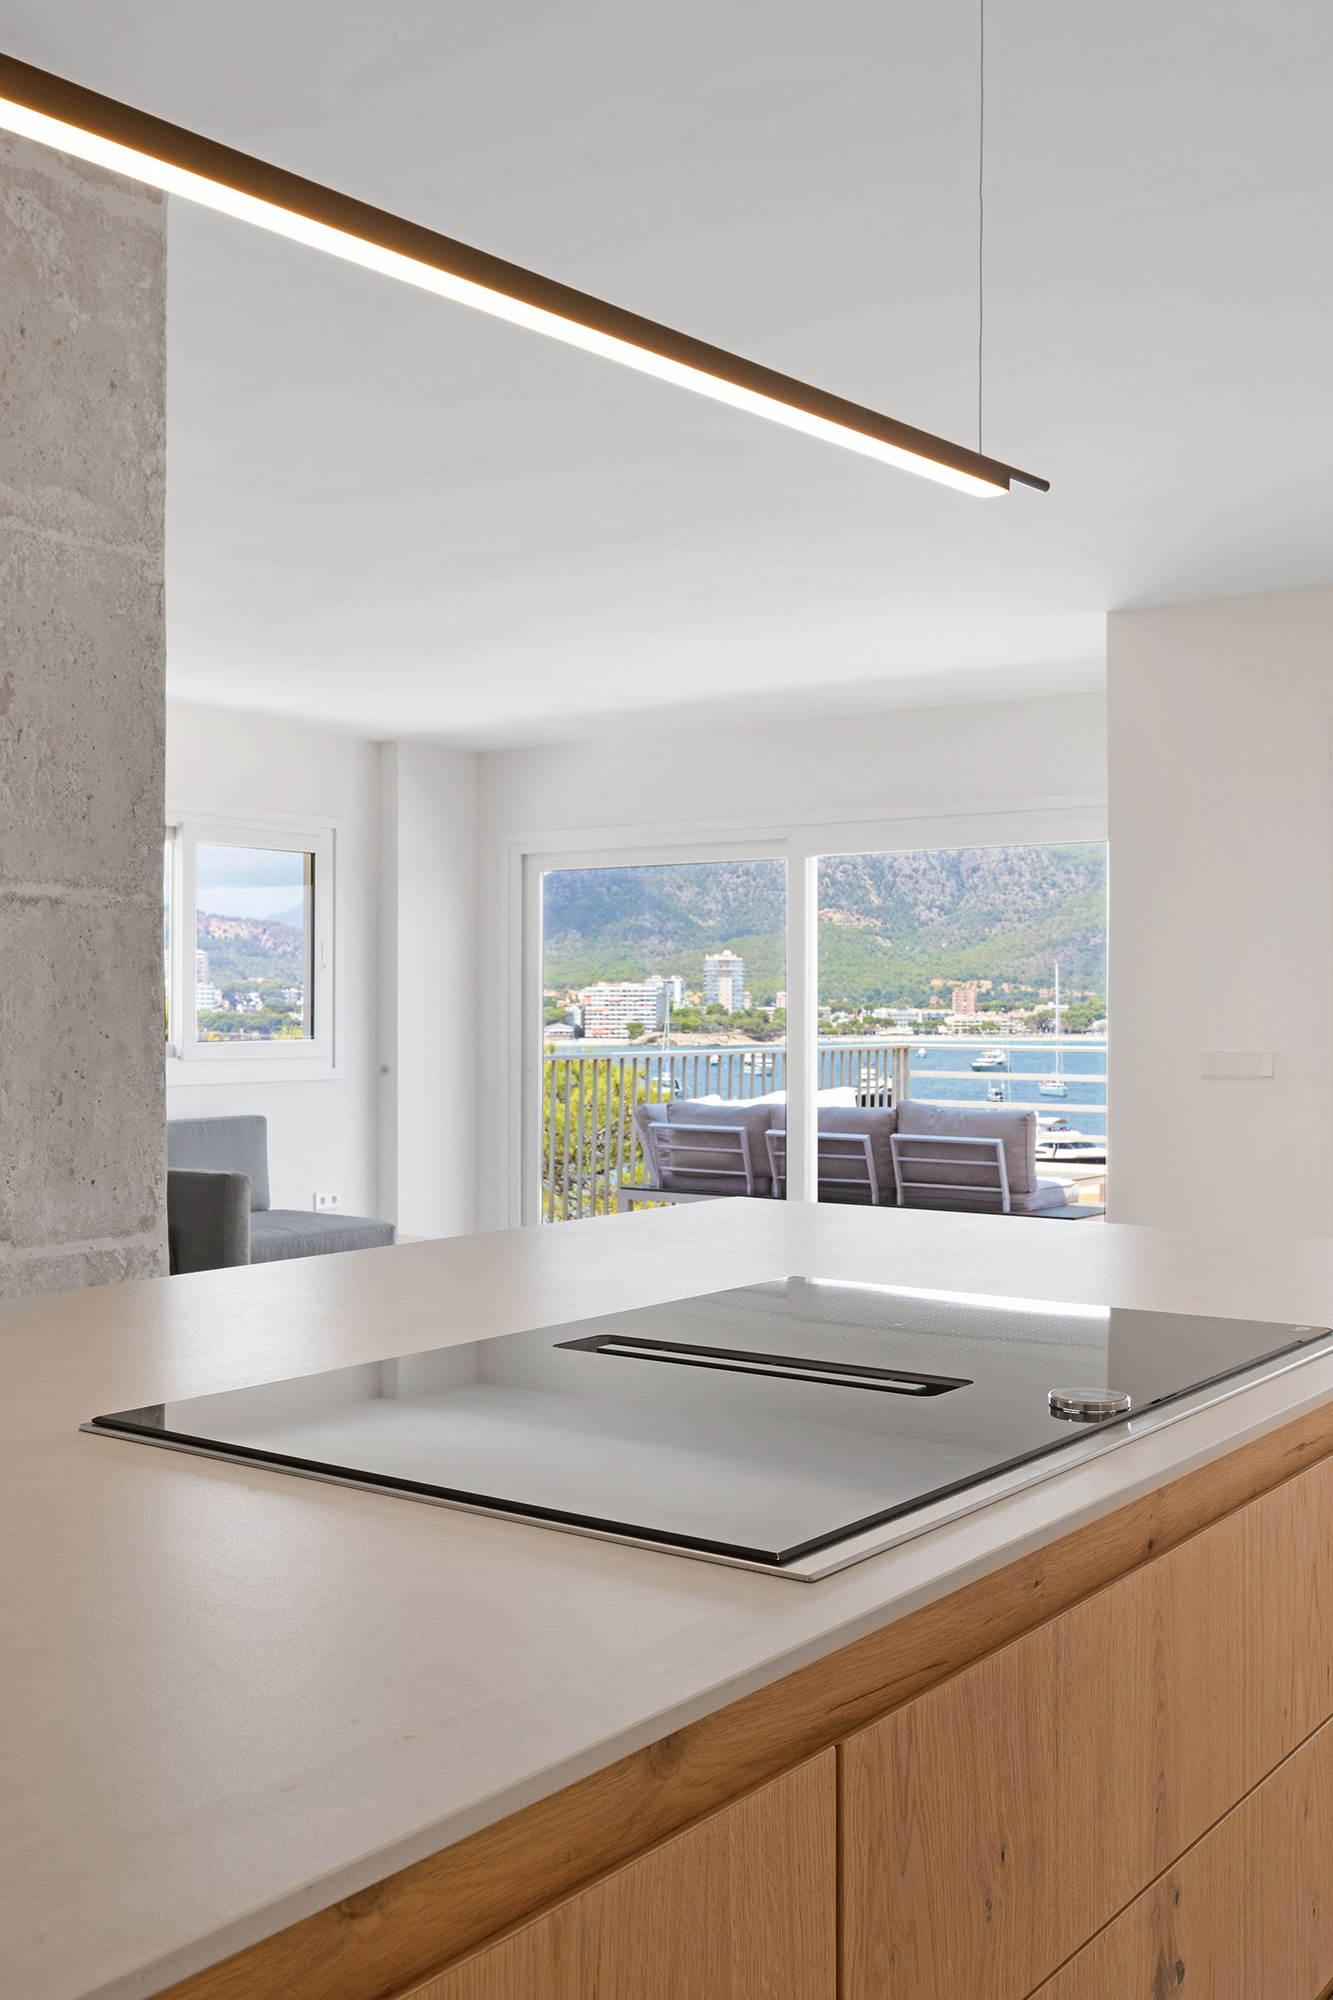 Image of Torrenova Mallorca 3 in Dekton, the perfect partner to make the most out of your holiday home - Cosentino